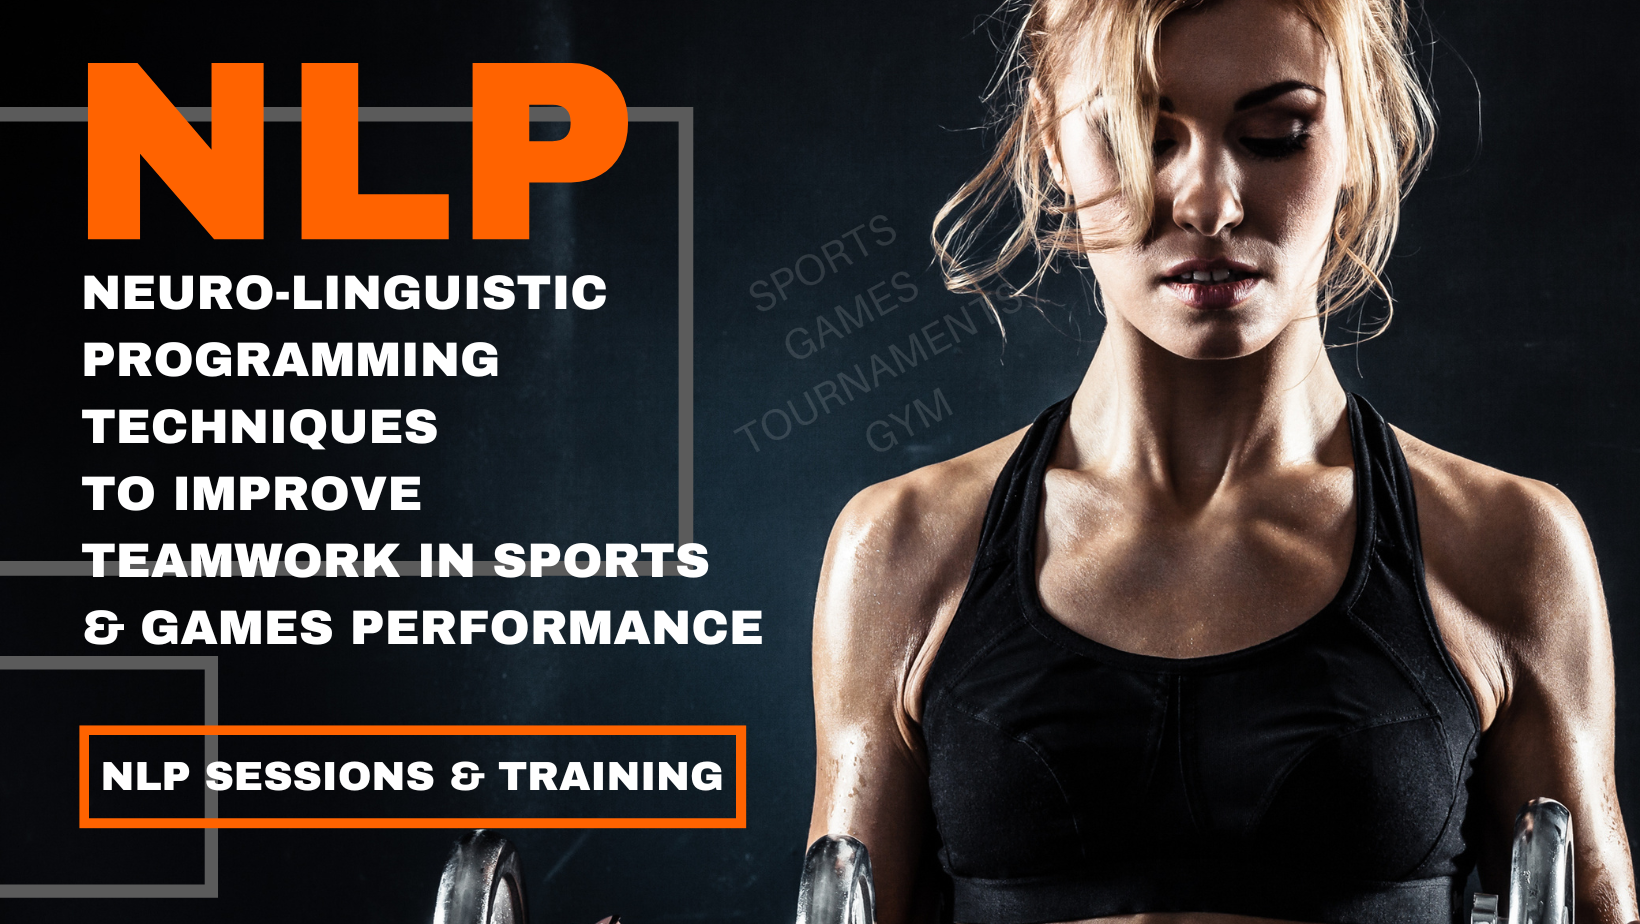 NLP techniques to improve teamwork in sports & games performance - Lucknow